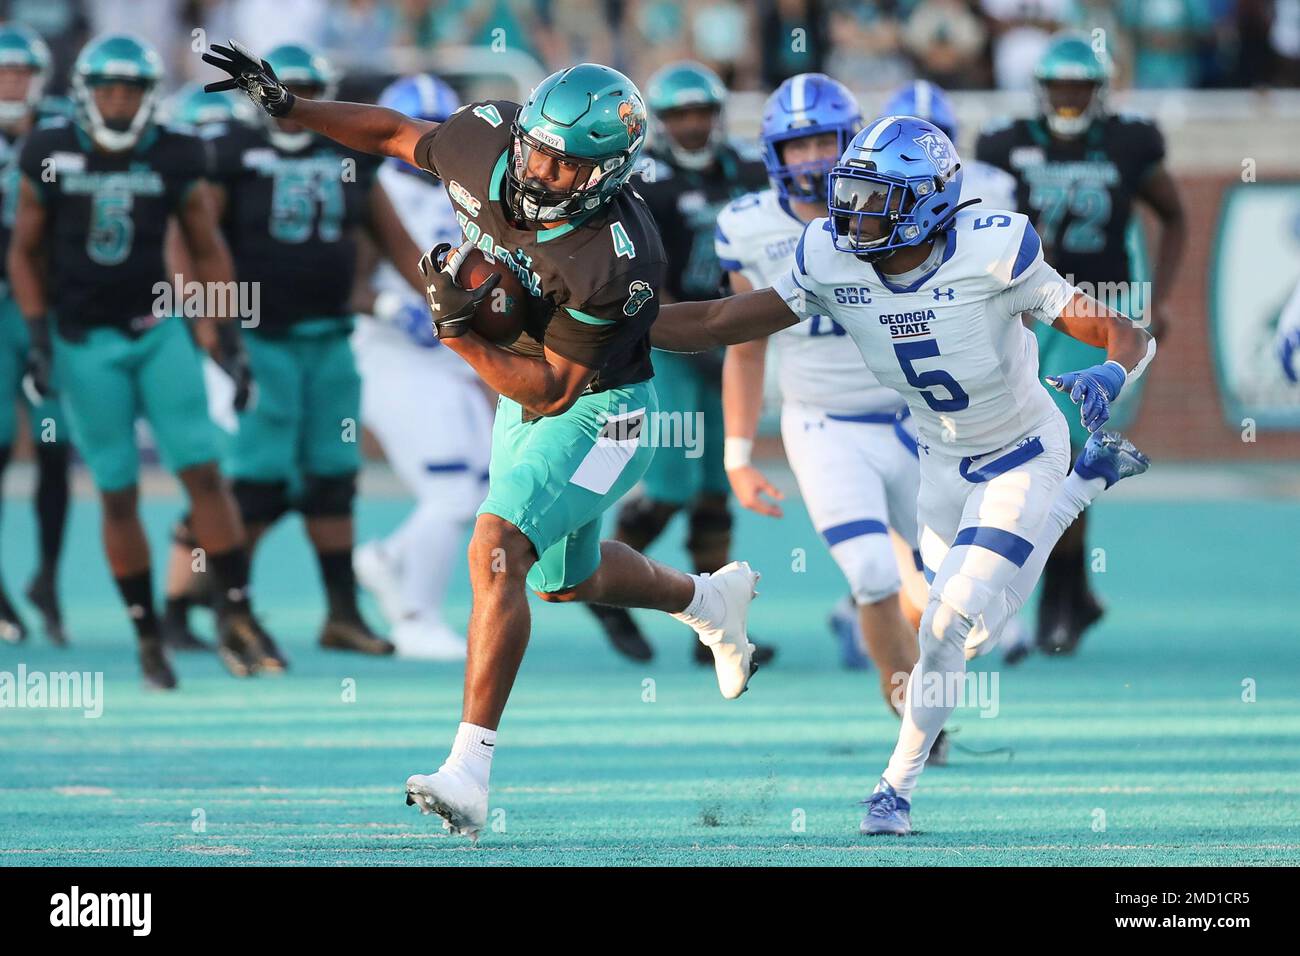 Coastal Carolina tight end Isaiah Likely (4) makes a one-handed catch against Georgia State cornerback Bryquice Brown (5) during the second half of an NCAA college football game Saturday, Nov. 13, 2021, in Conway, S.C. (AP Photo/Artie Walker, Jr.) Stock Photo